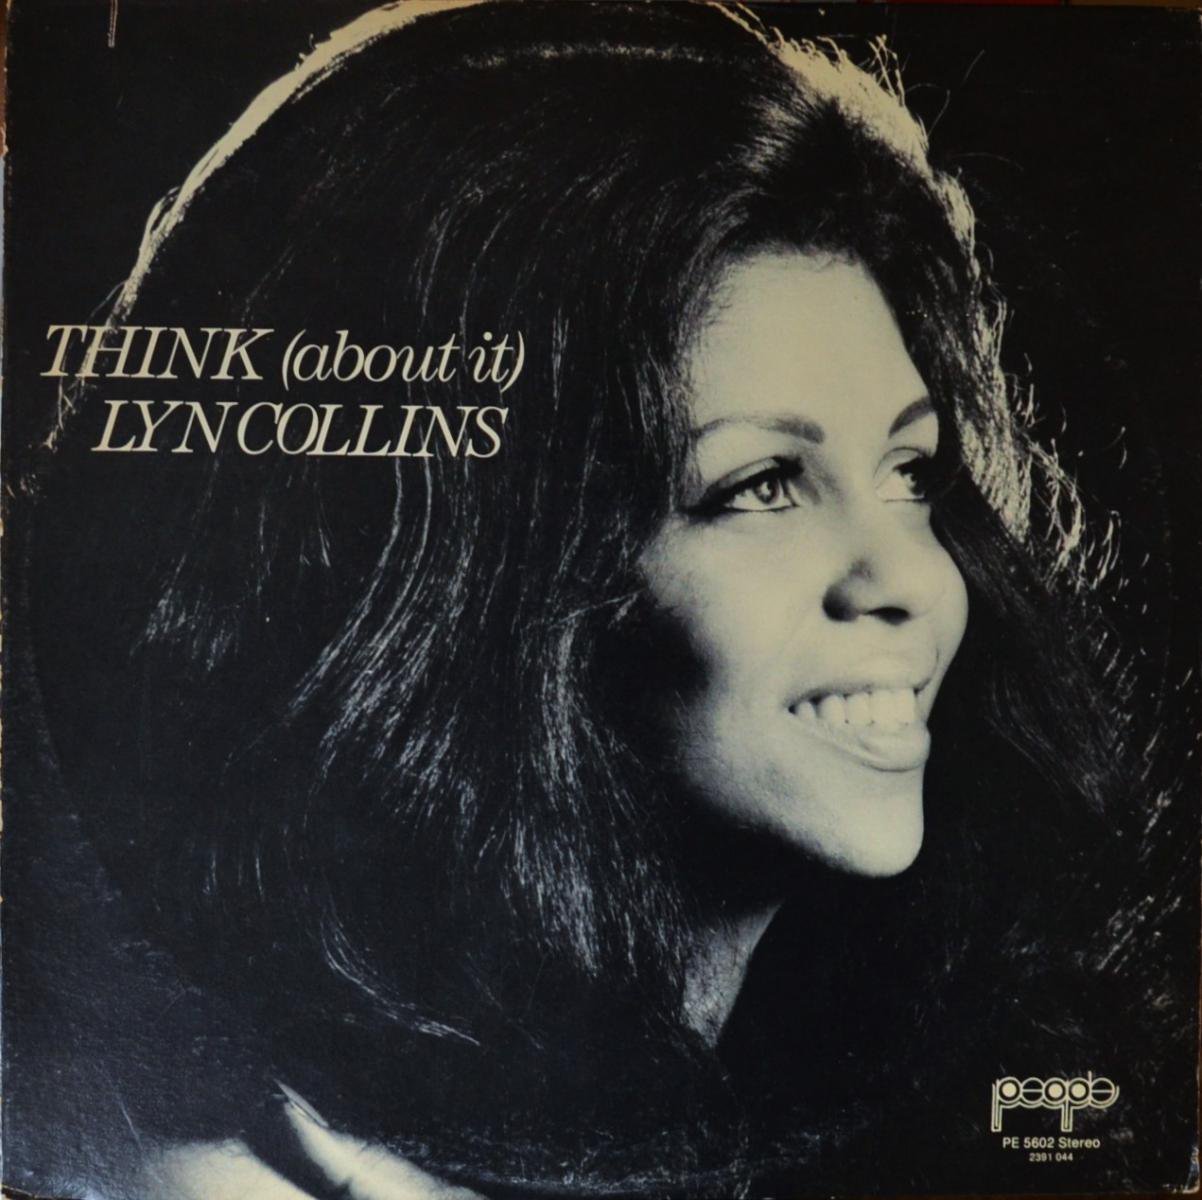 LYN COLLINS / THINK (ABOUT IT) (LP)